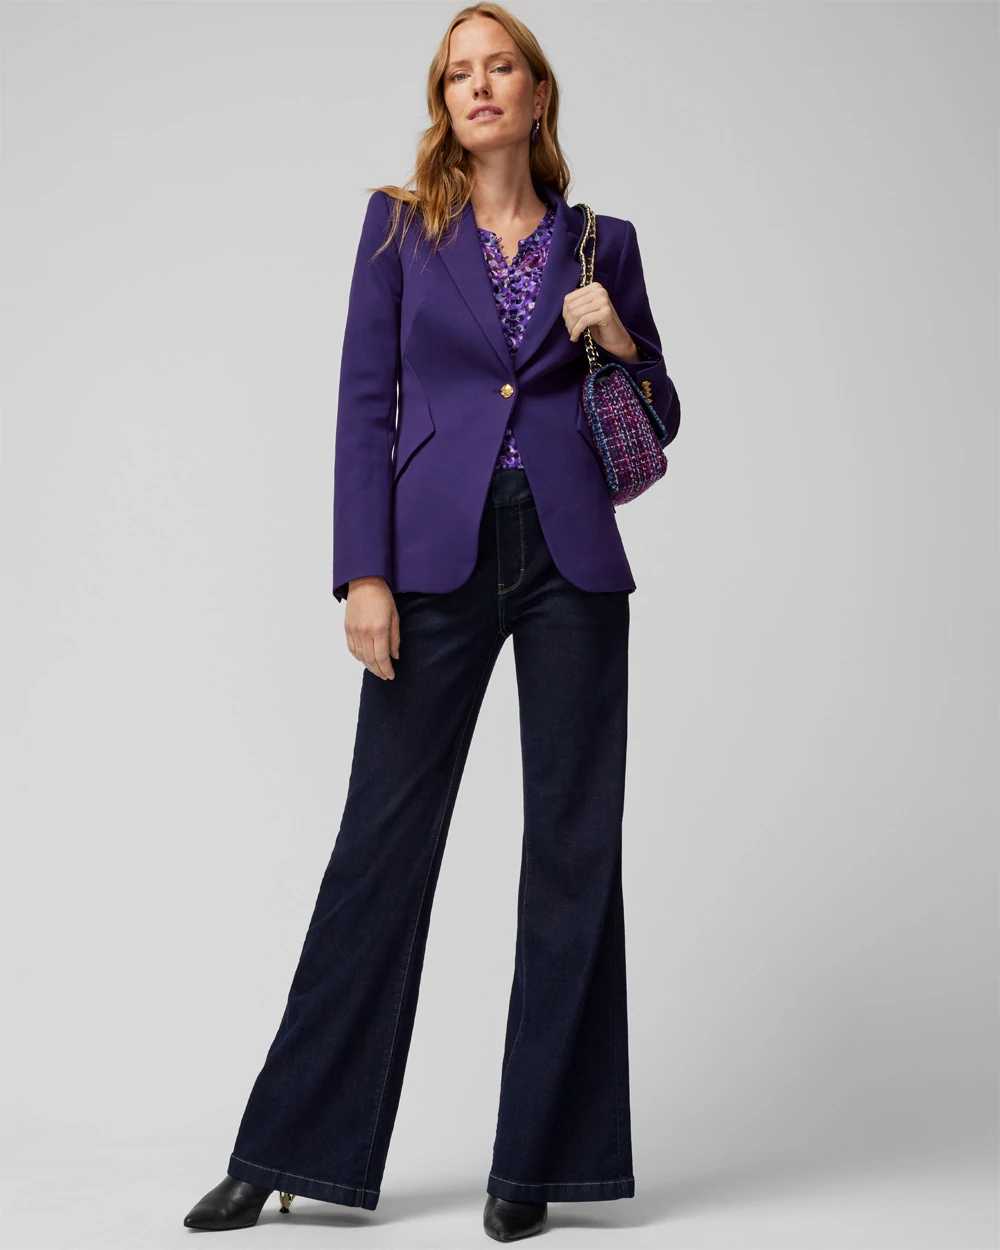 WHBM® Petite Luxe Stretch Editor Blazer click to view larger image.